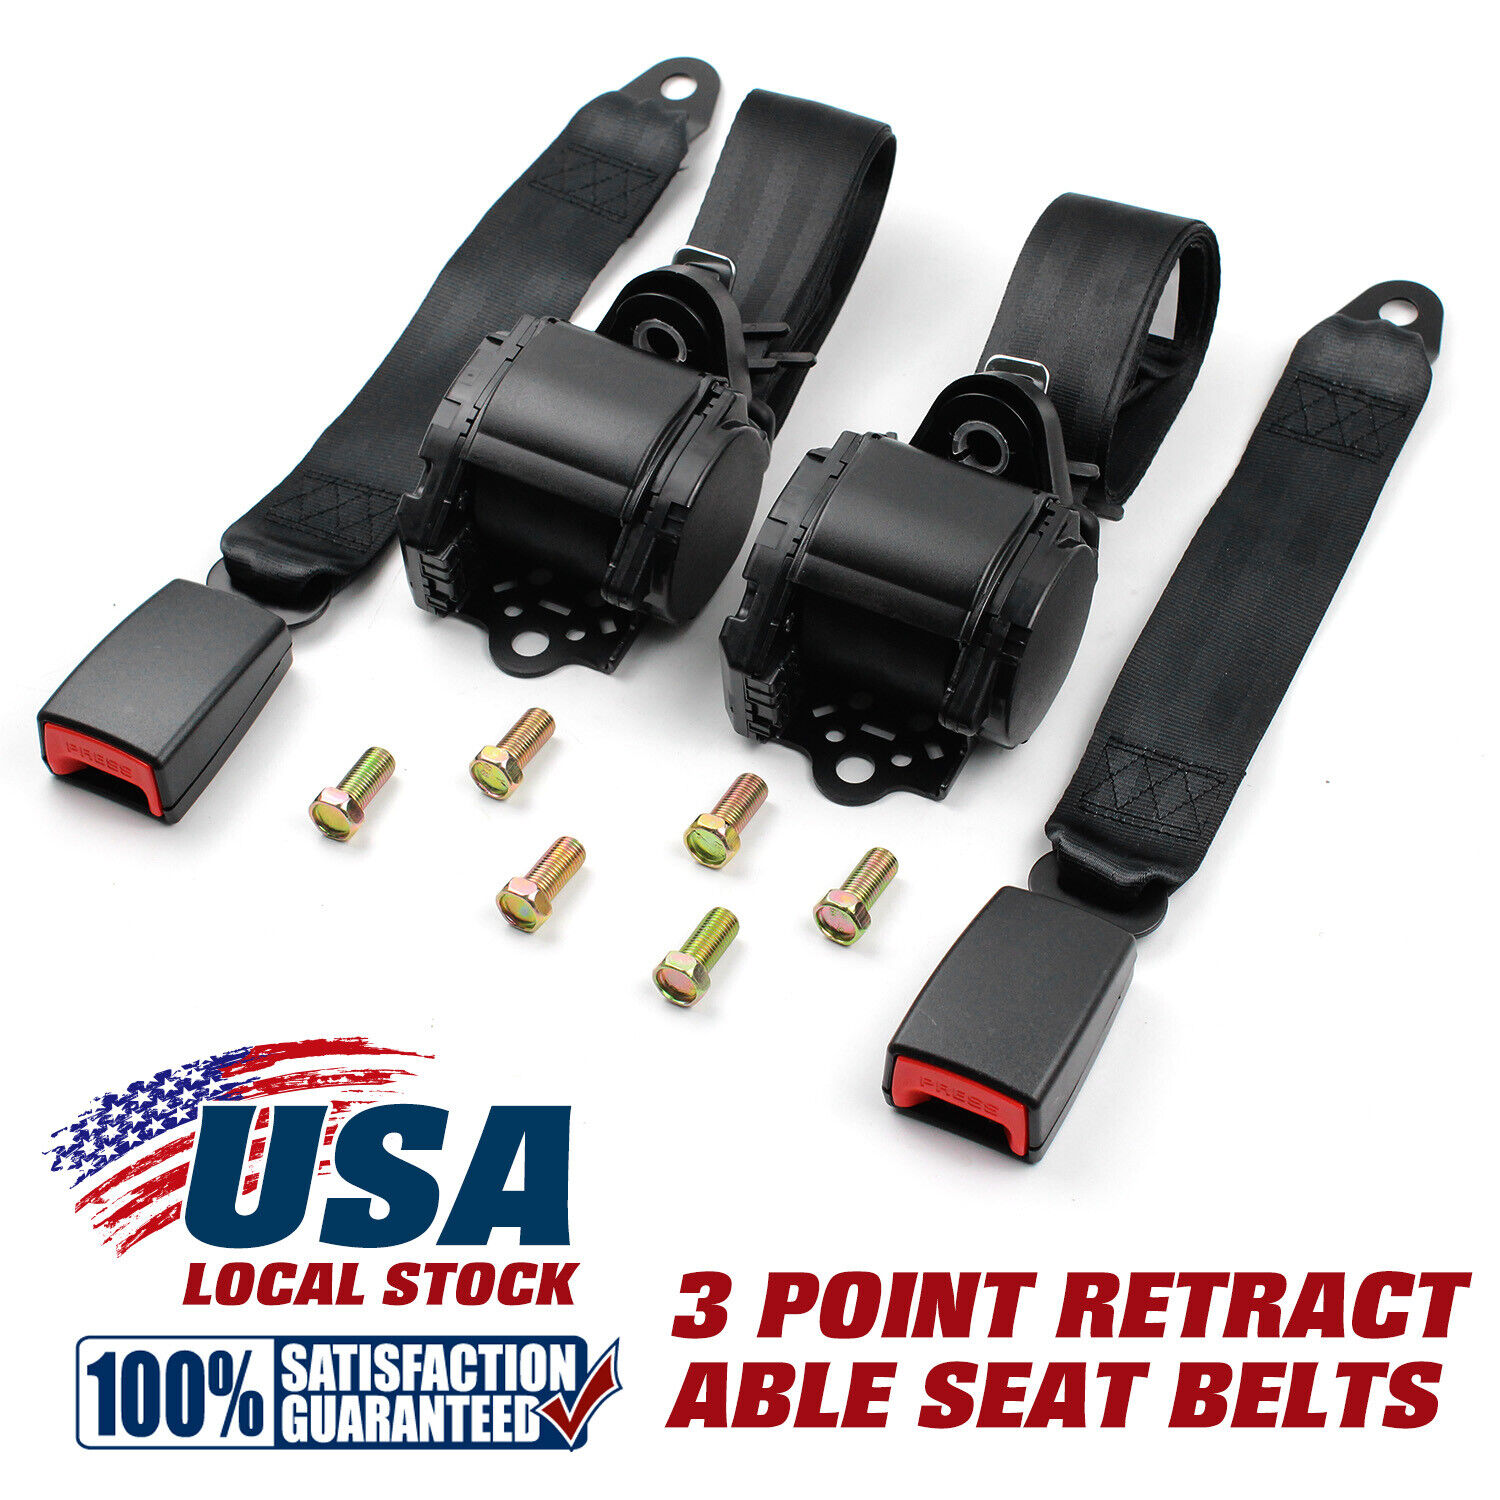 2 Set Universal 3 Point Retractable Seat Belts For  J20 1982-1988 US STORE